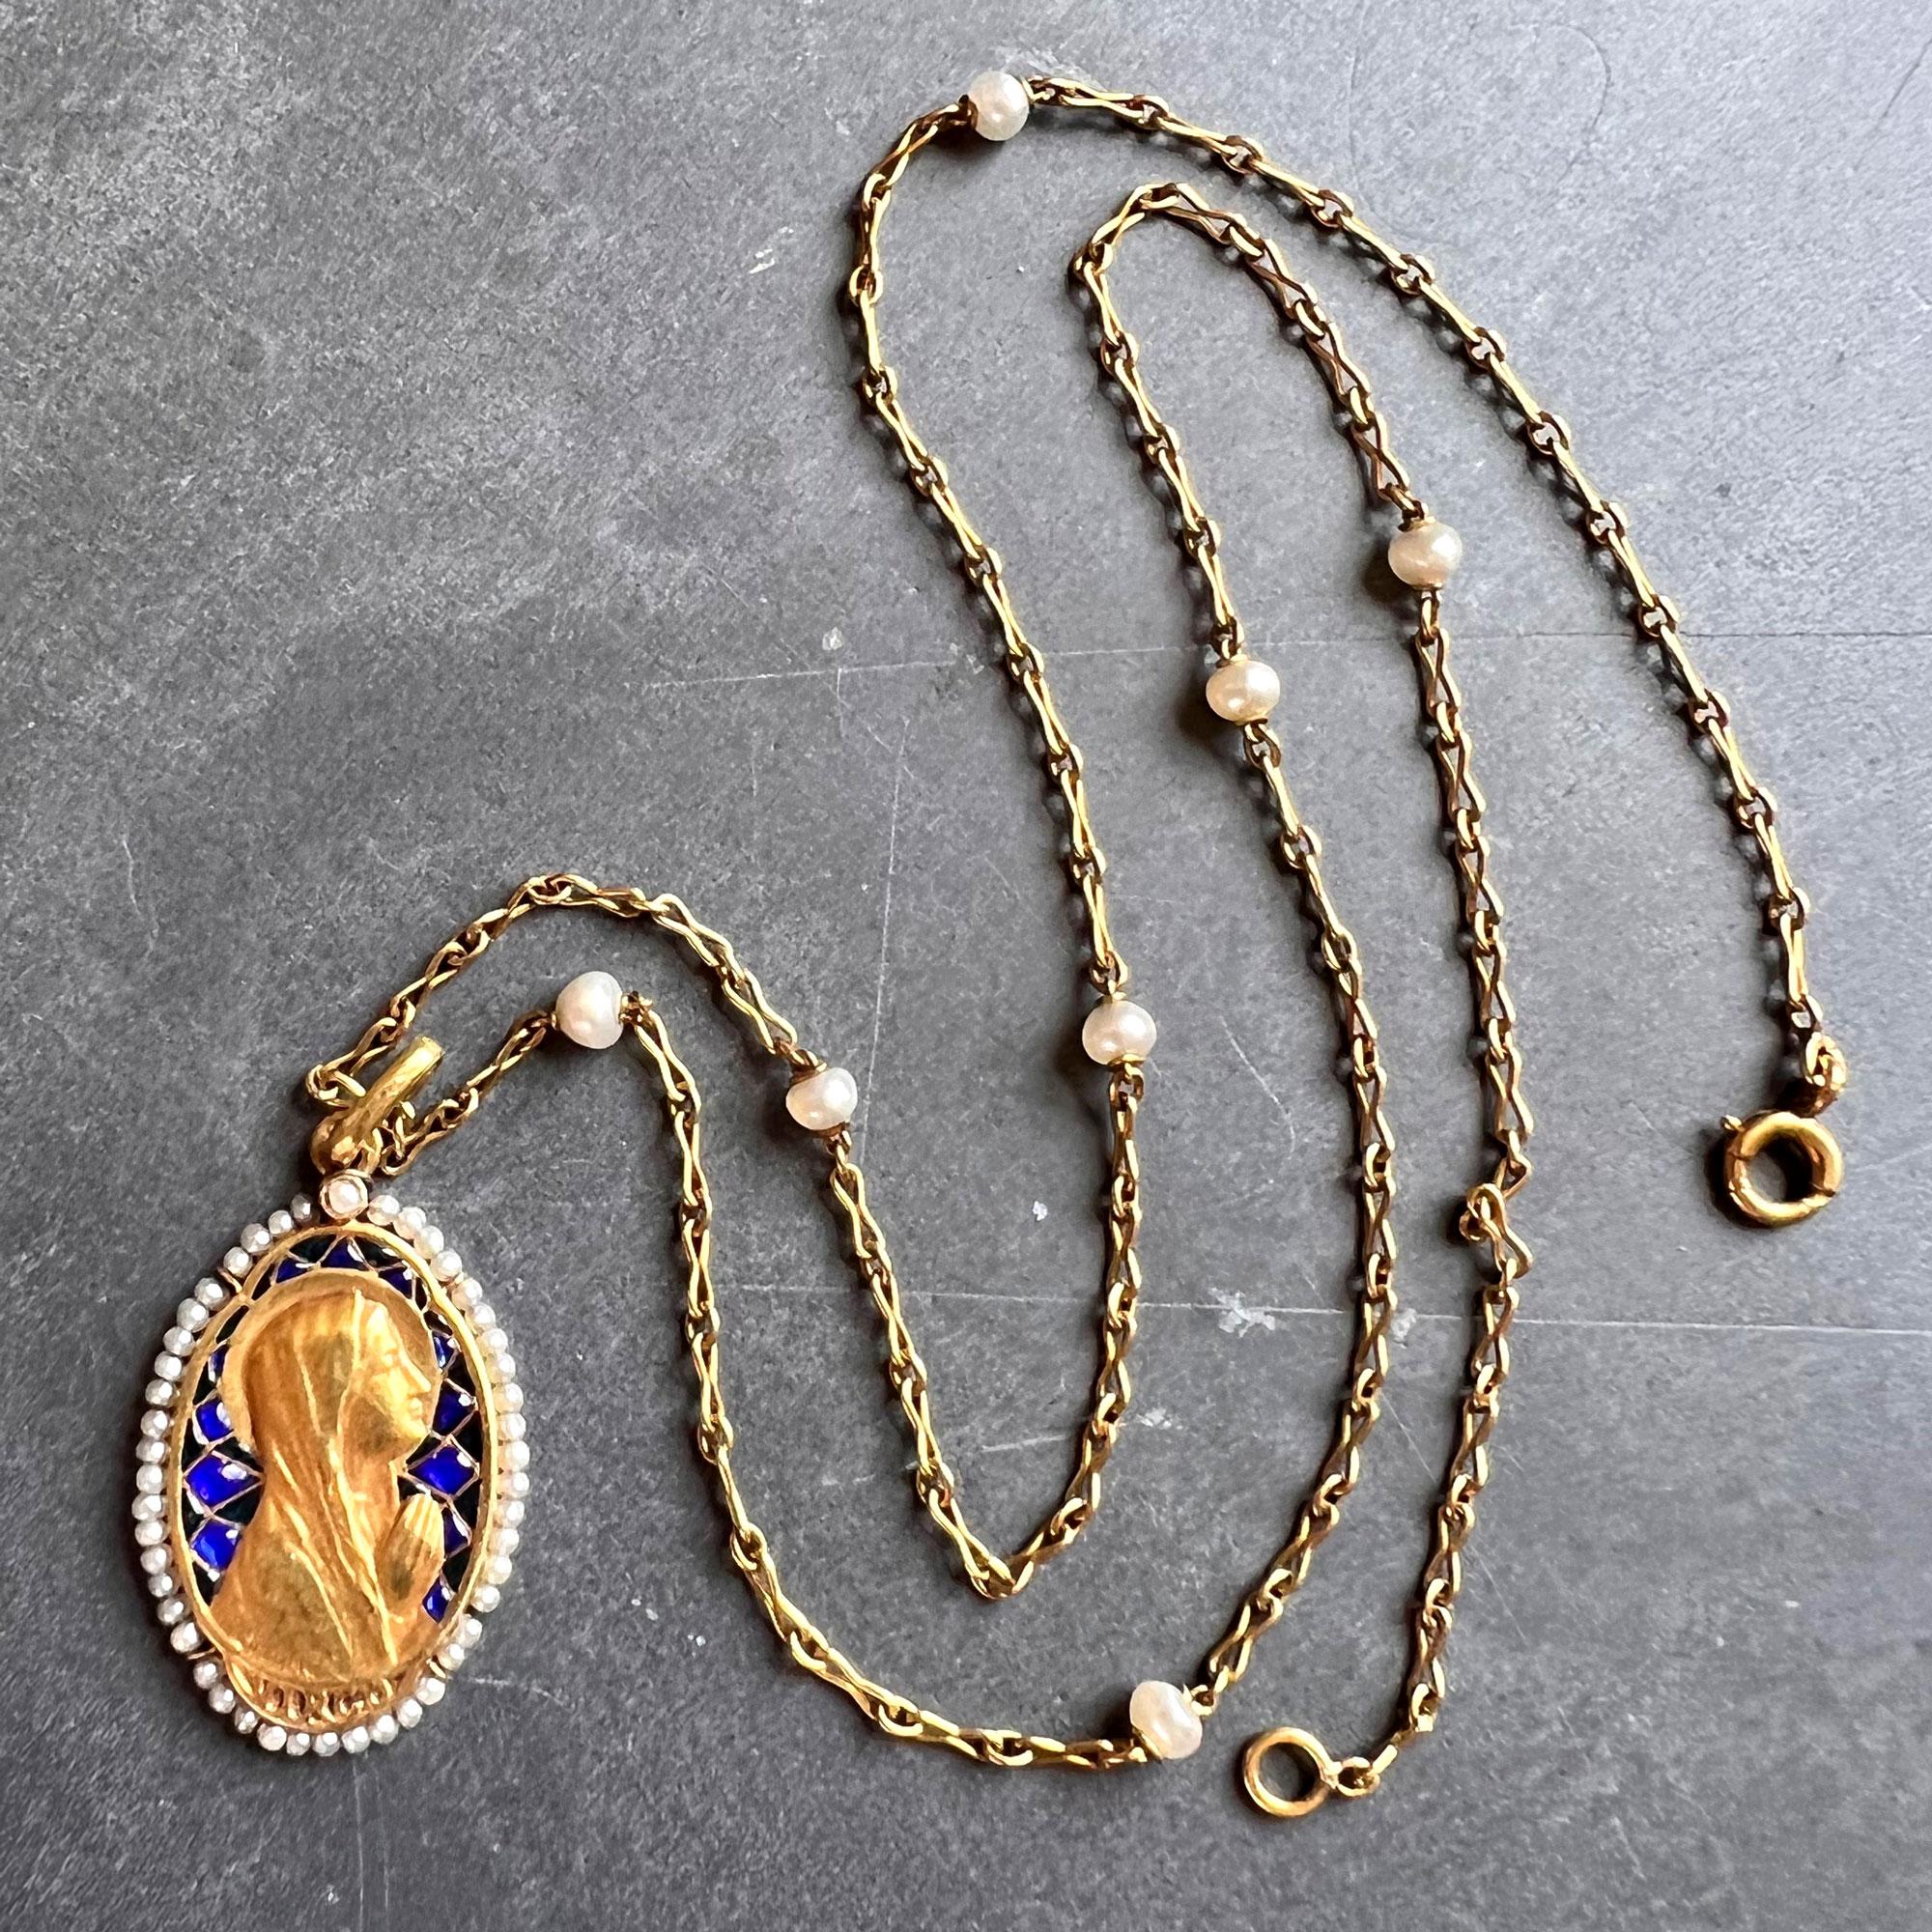 An 18 karat (18K) yellow gold pendant designed as a medal depicting the Virgin Mary with plique-a-jour enamel, a rose-cut diamond and surrounded by 46 natural seed pearls. Signed Sellier and engraved ‘VIRGO’. Stamped with the eagle’s head for French